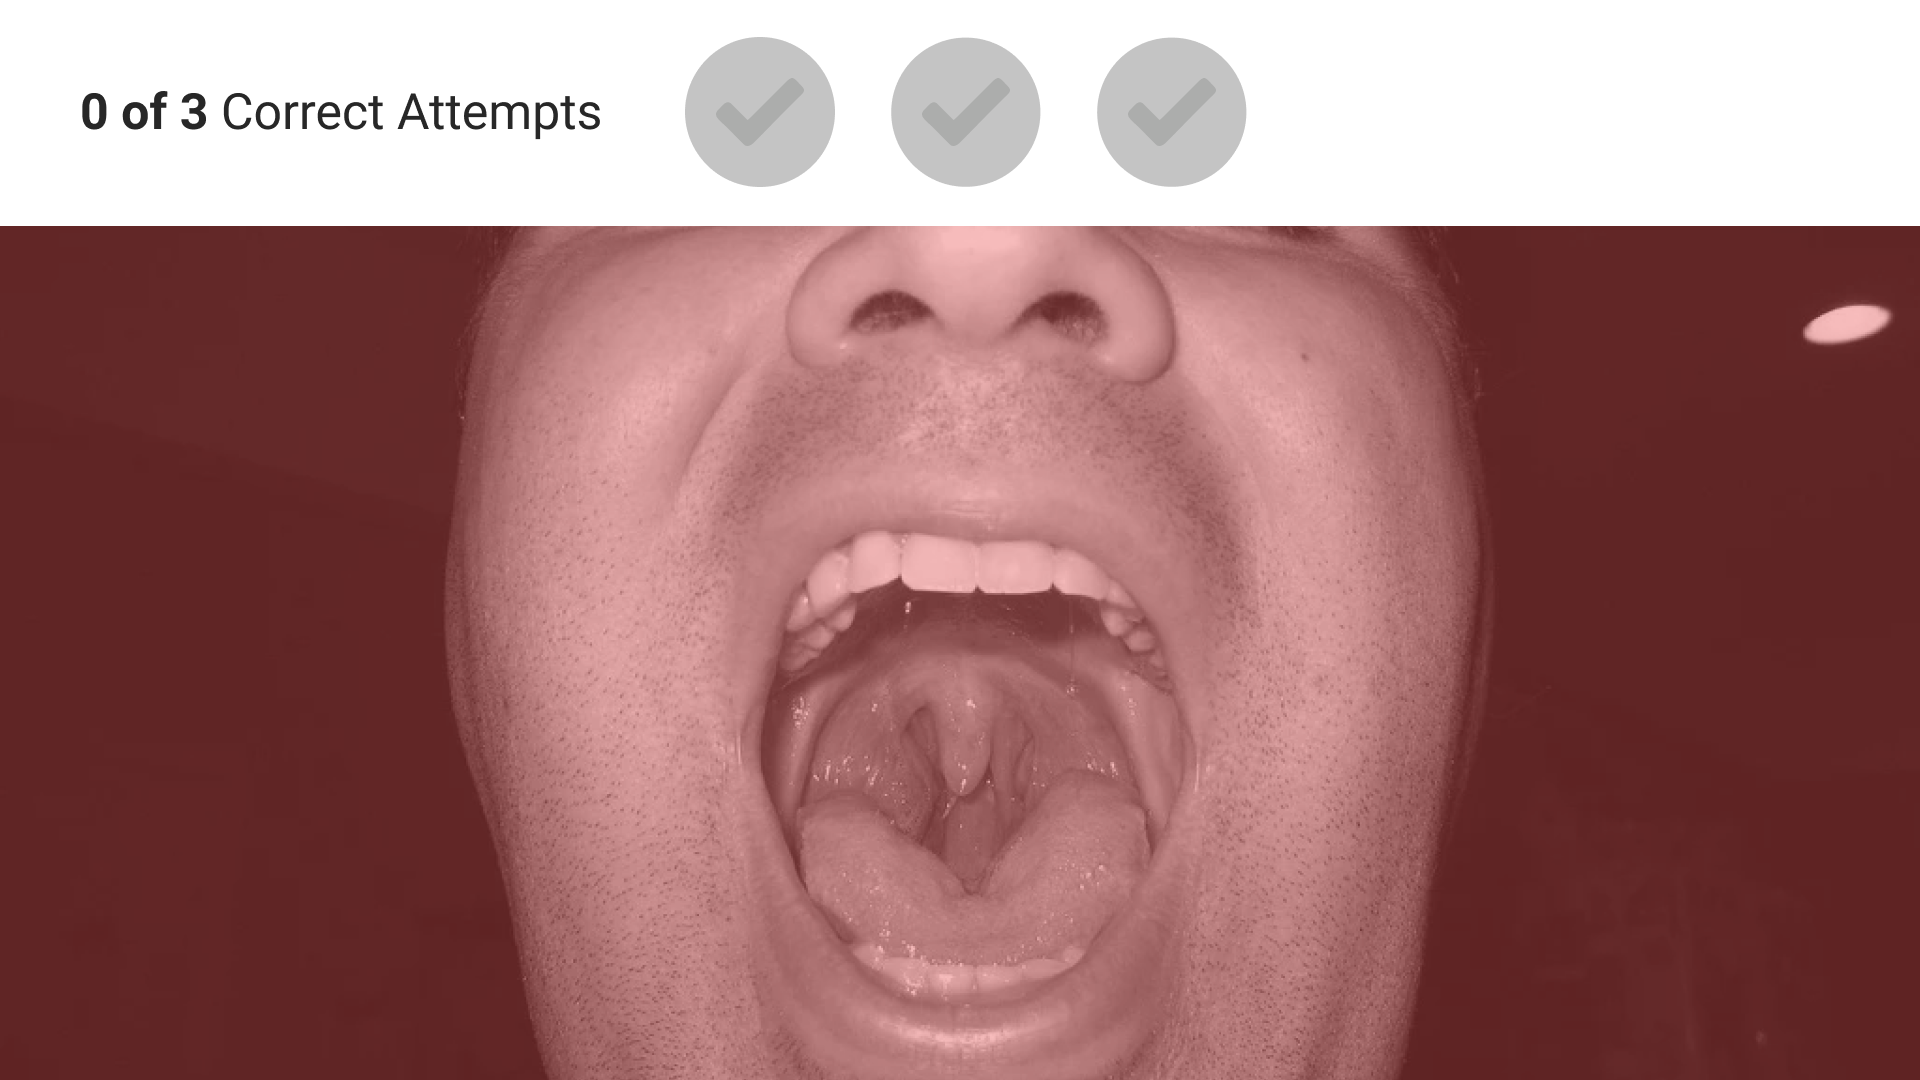 Screen of an open mouth